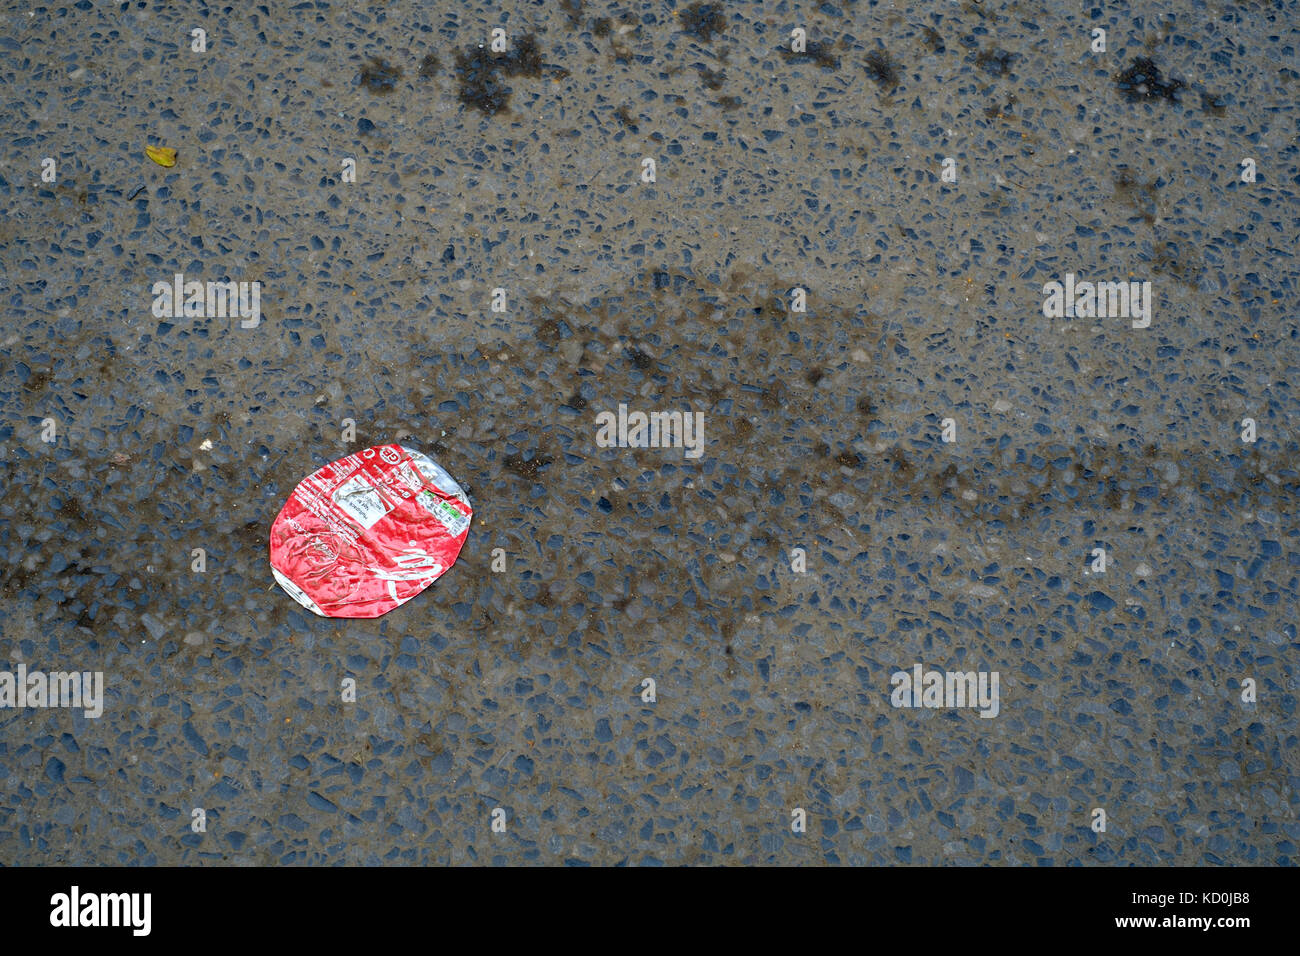 flattened empty coca cola can flattened against the road tarmac england uk Stock Photo